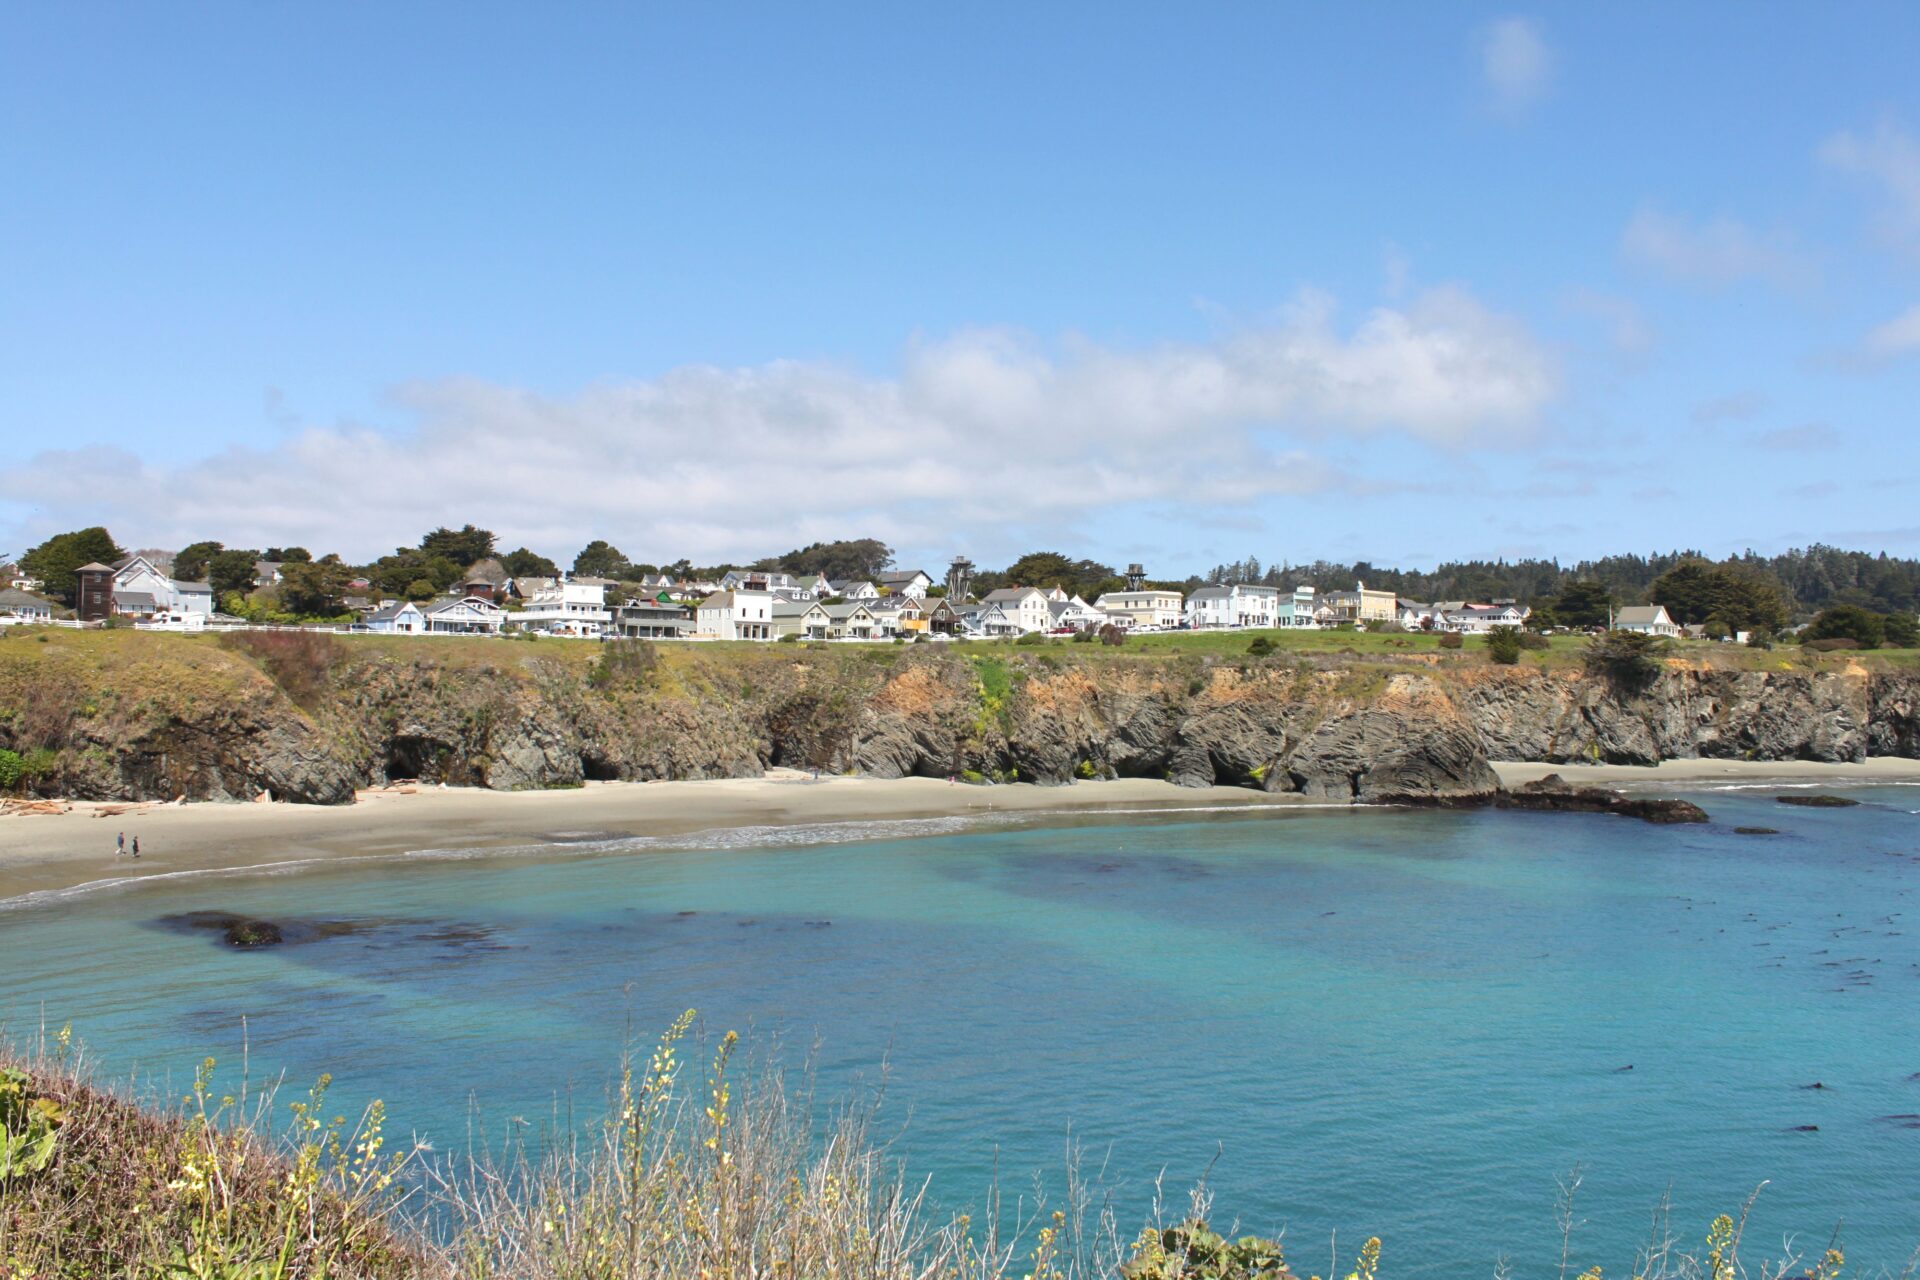 Visiting Mendocino: The Place We Almost Didn’t Stop (That We Loved)